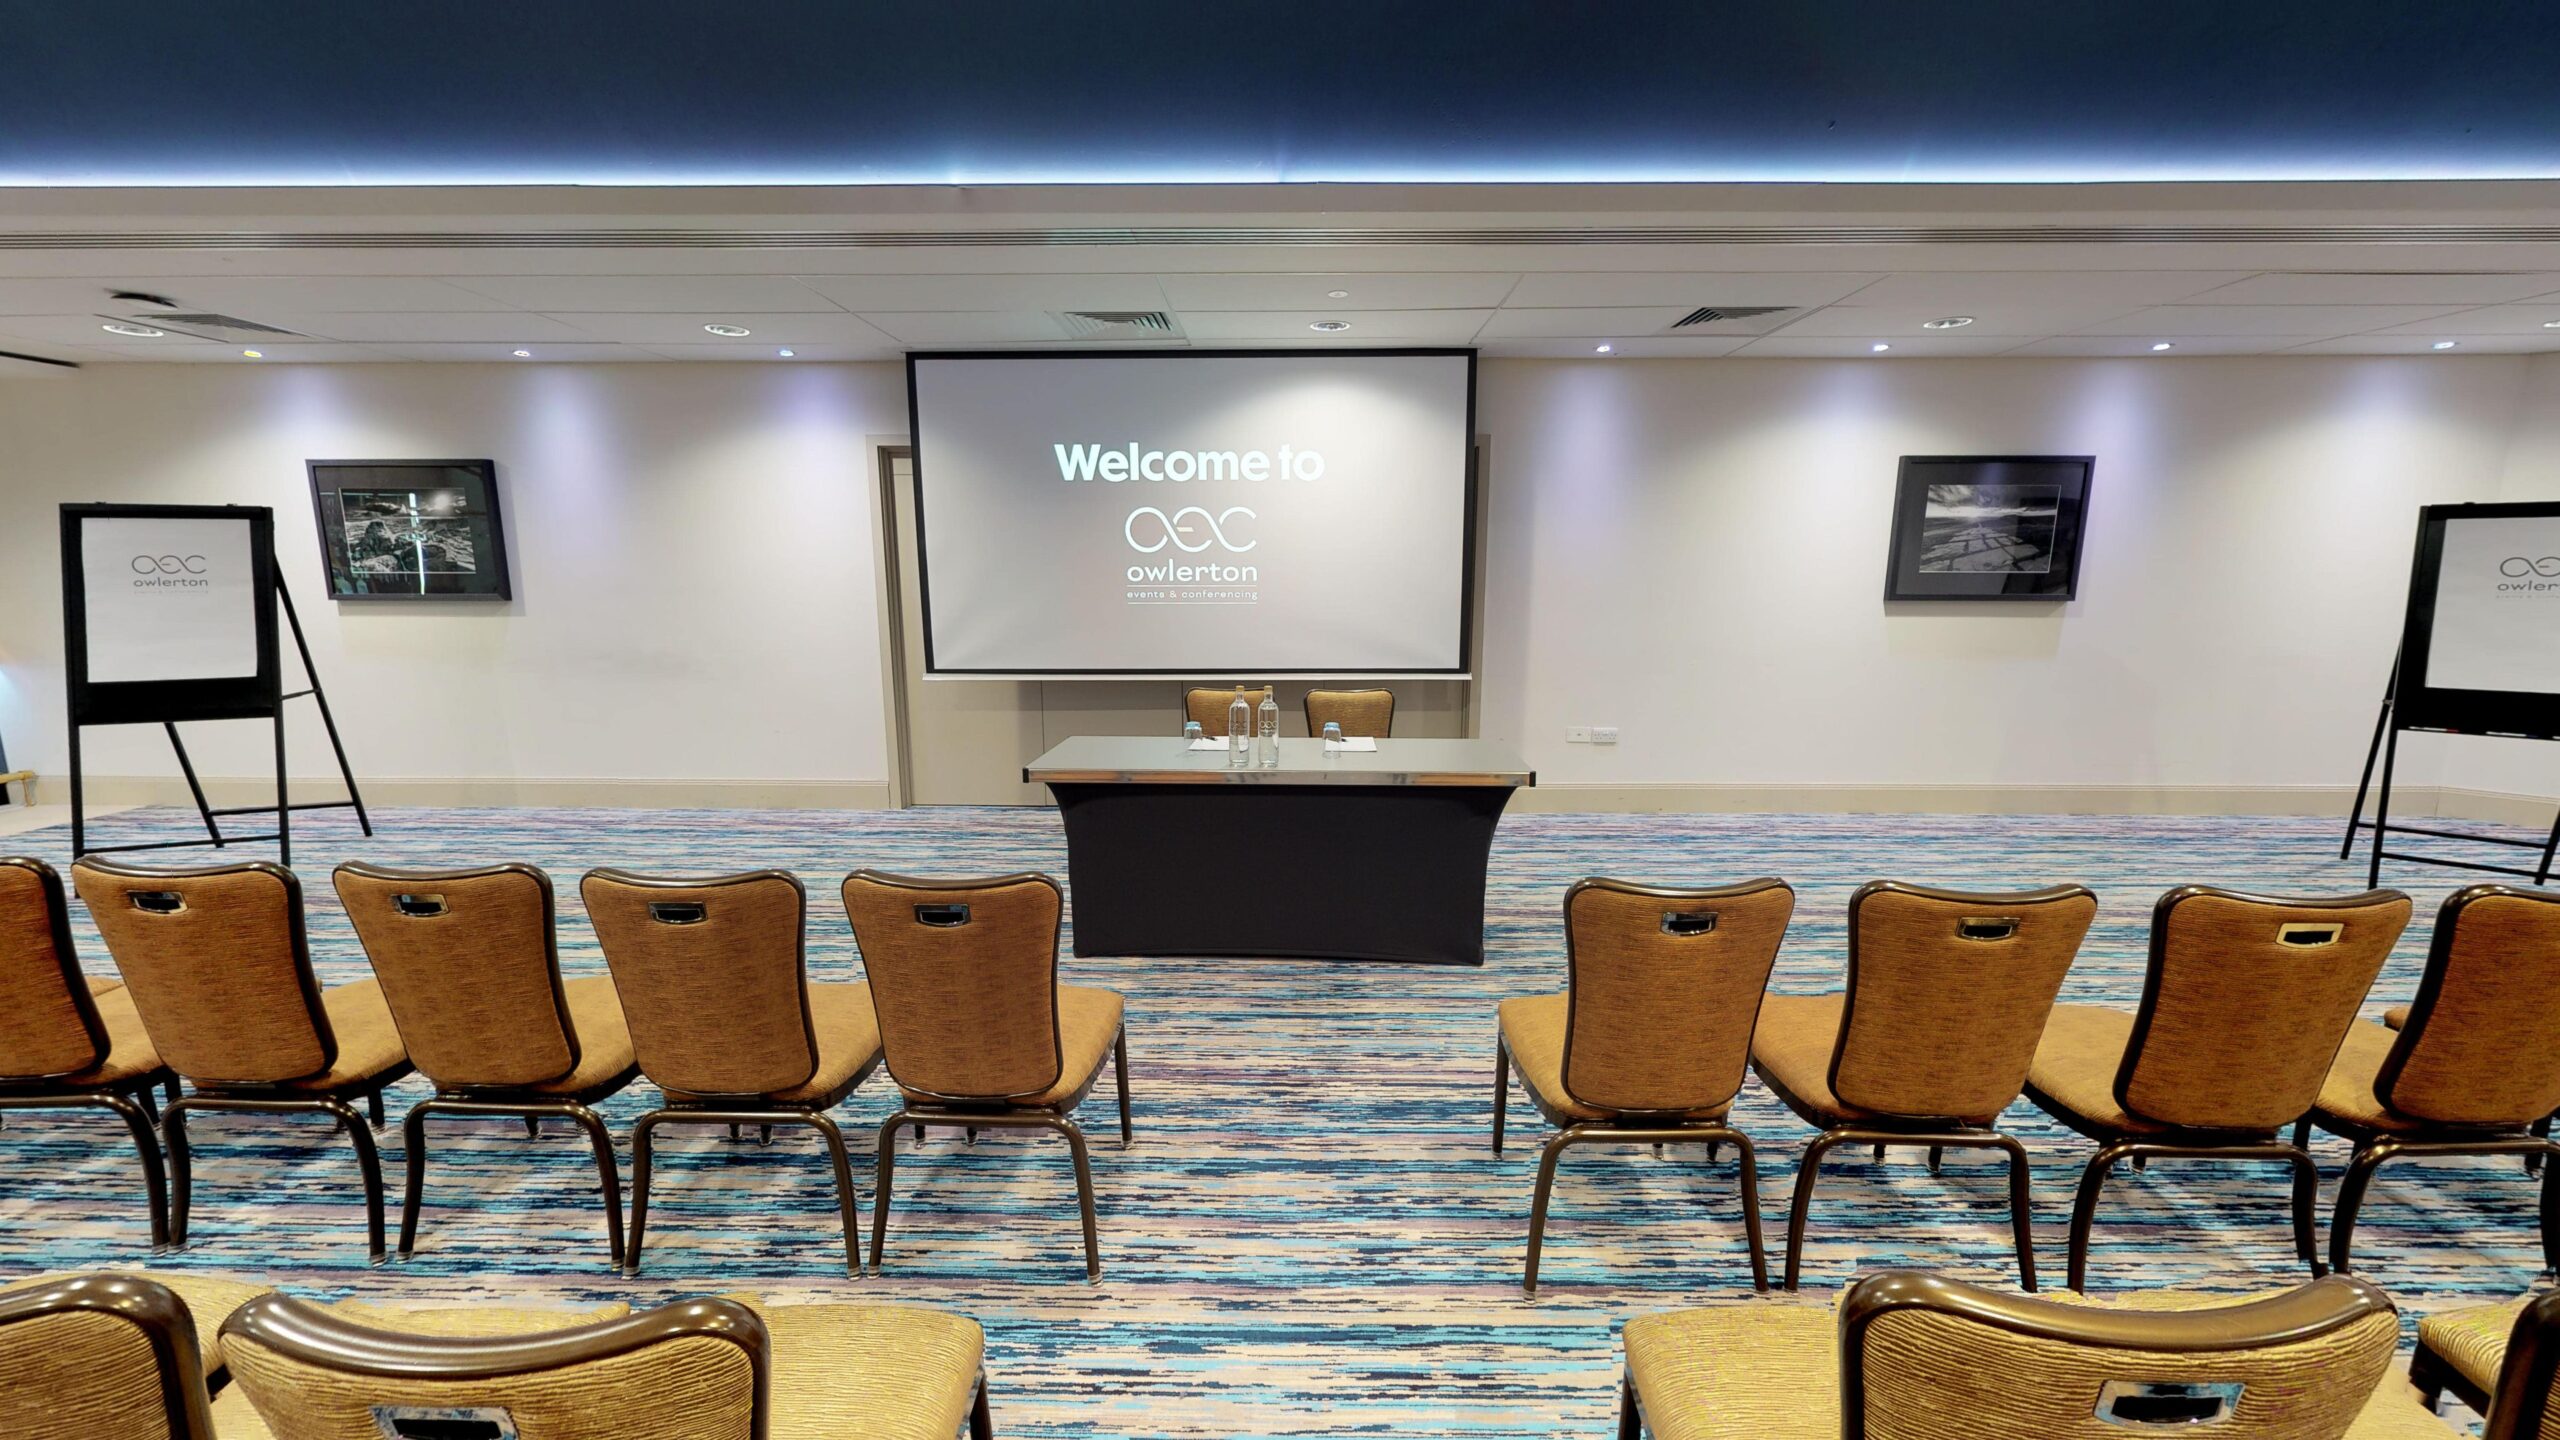 Conference Venue Hire - Conference Rooms to Hire - Conference Venue Sheffield - Conference Room Sheffield - OEC Sheffield